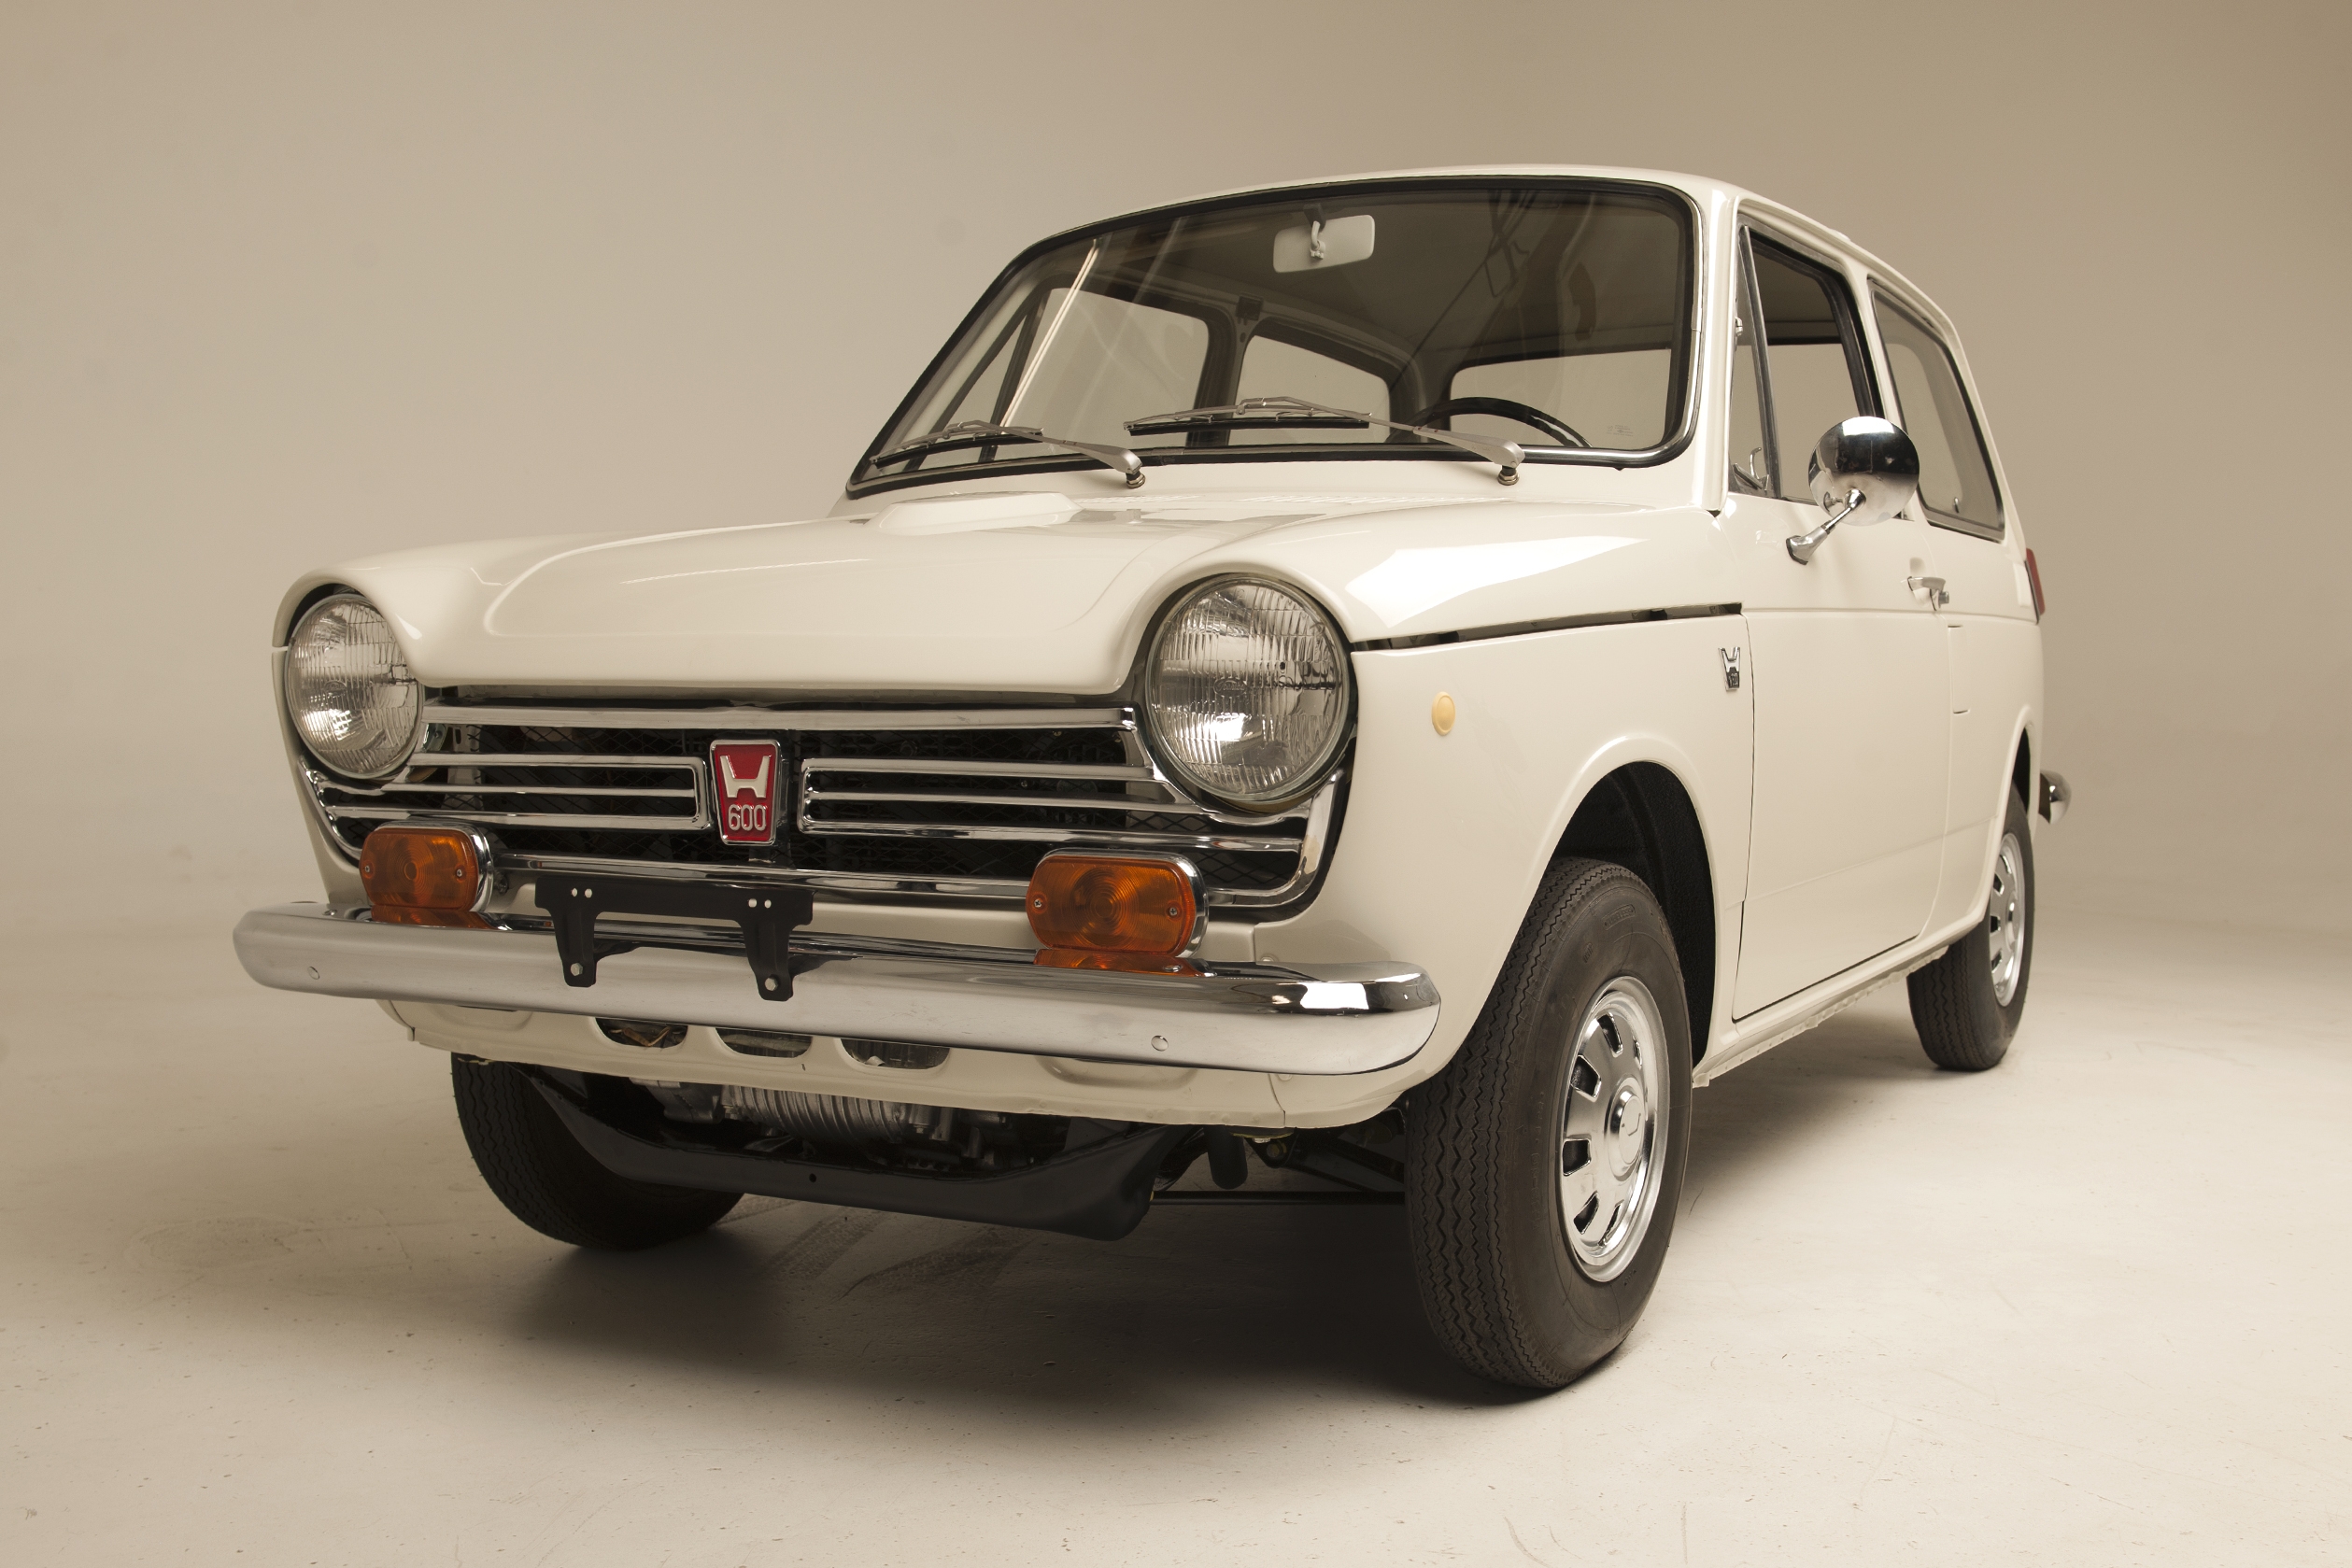 Honda Reveals Fully Restored "Serial One" as Painstaking Six-Month Journey Comes to a Close